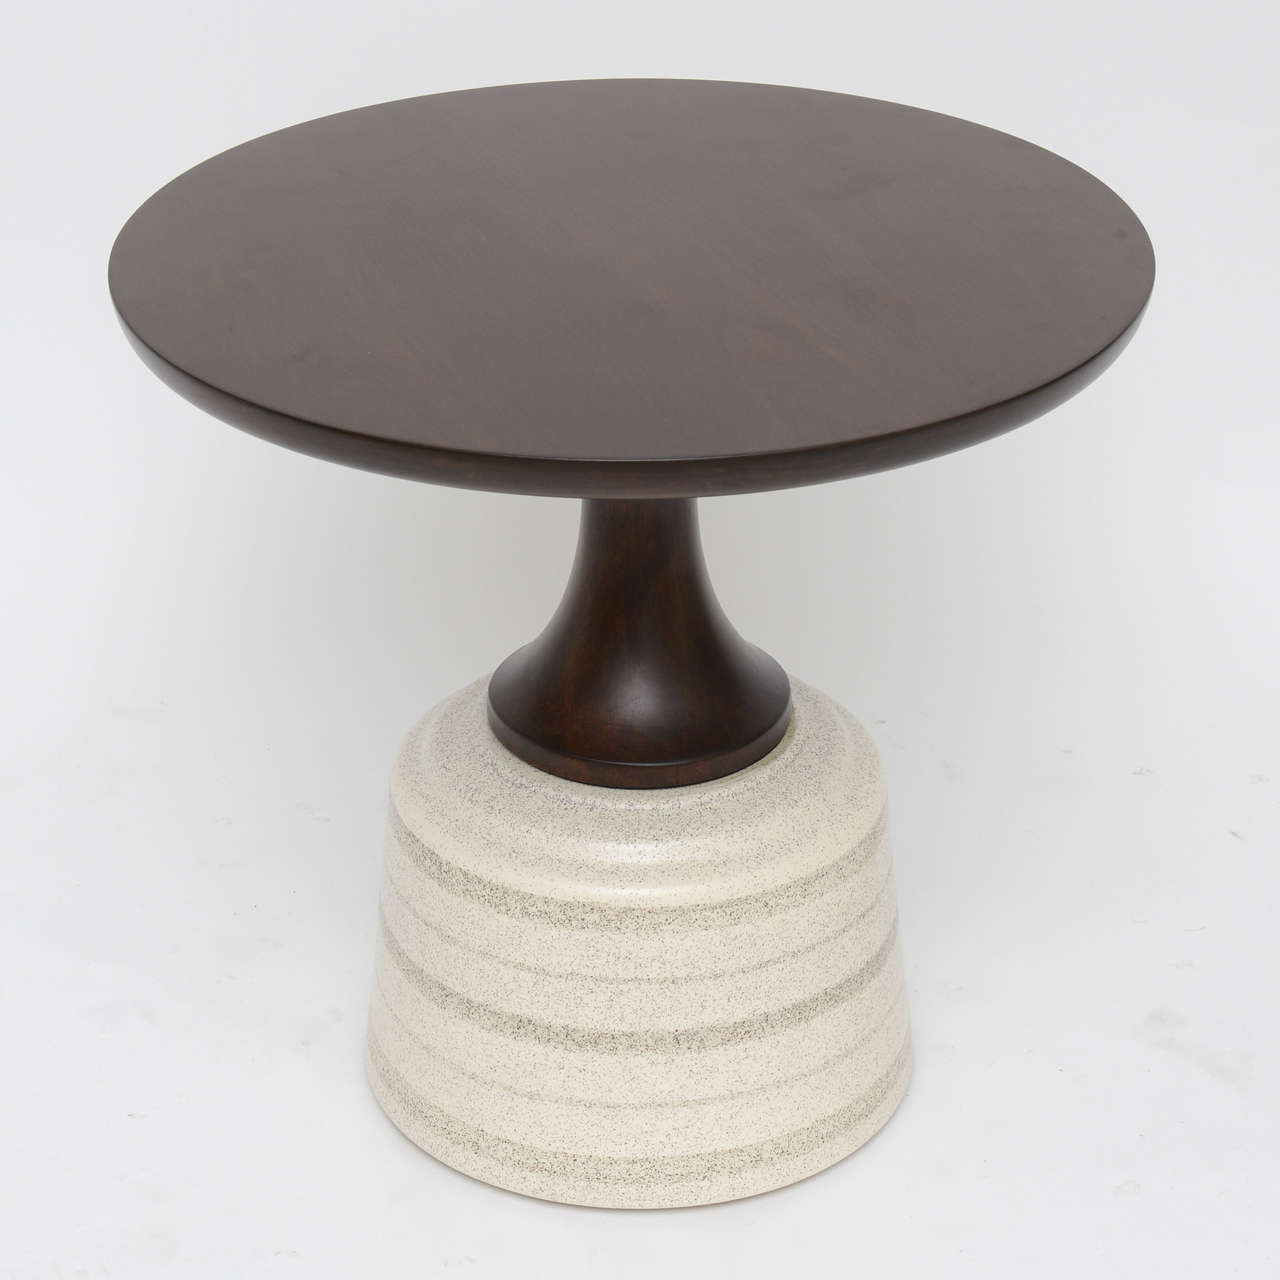 One of our favorite little side tables by John Van Koert for Drexel. Ceramic base and newly re-finished sculpted walnut top.